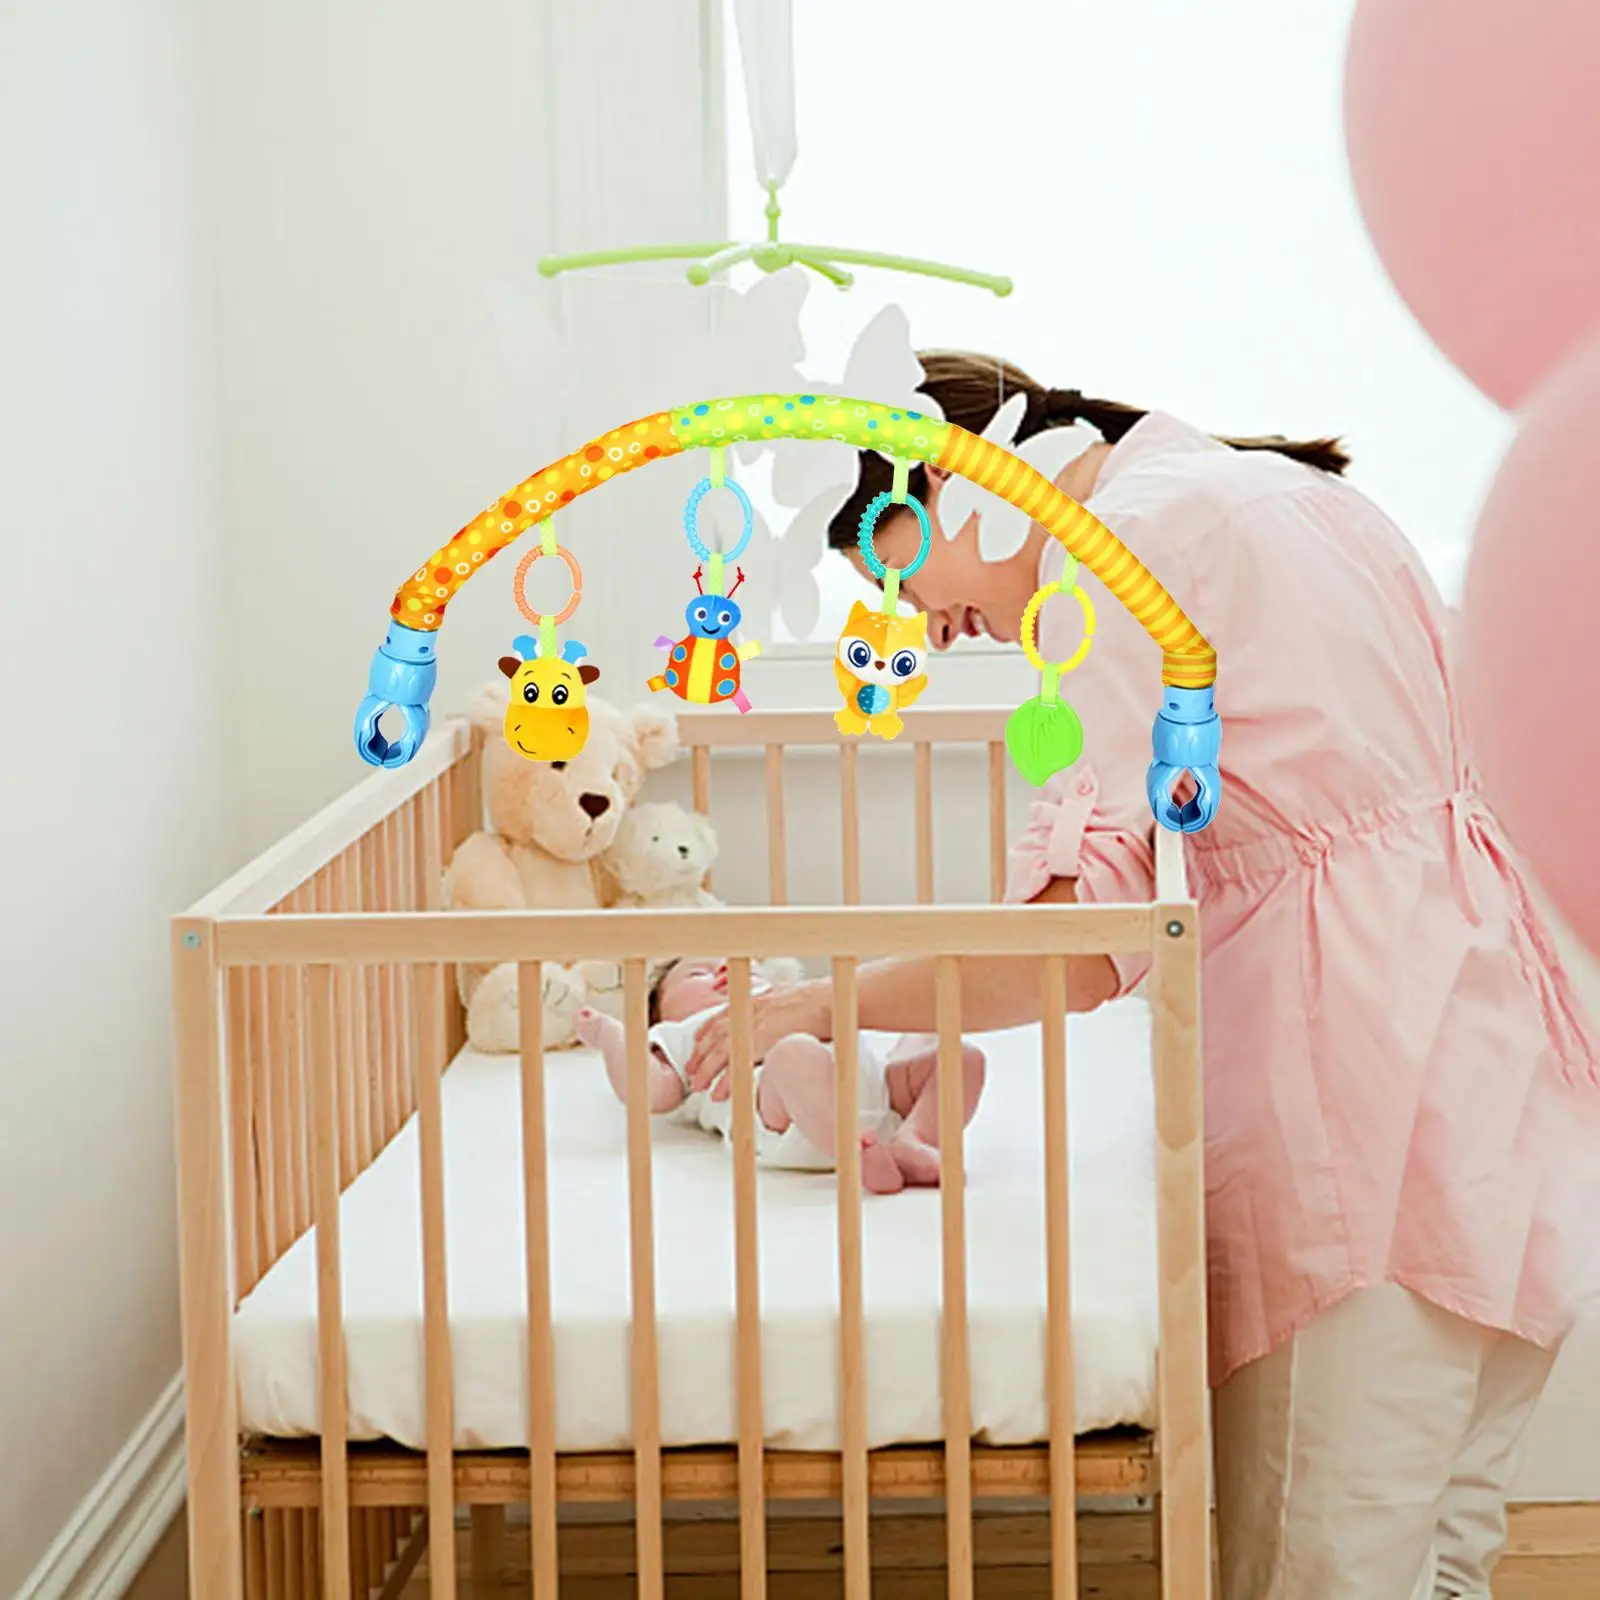 Foldable Hanging Educational Cute for Travel Cradle Girls Boys